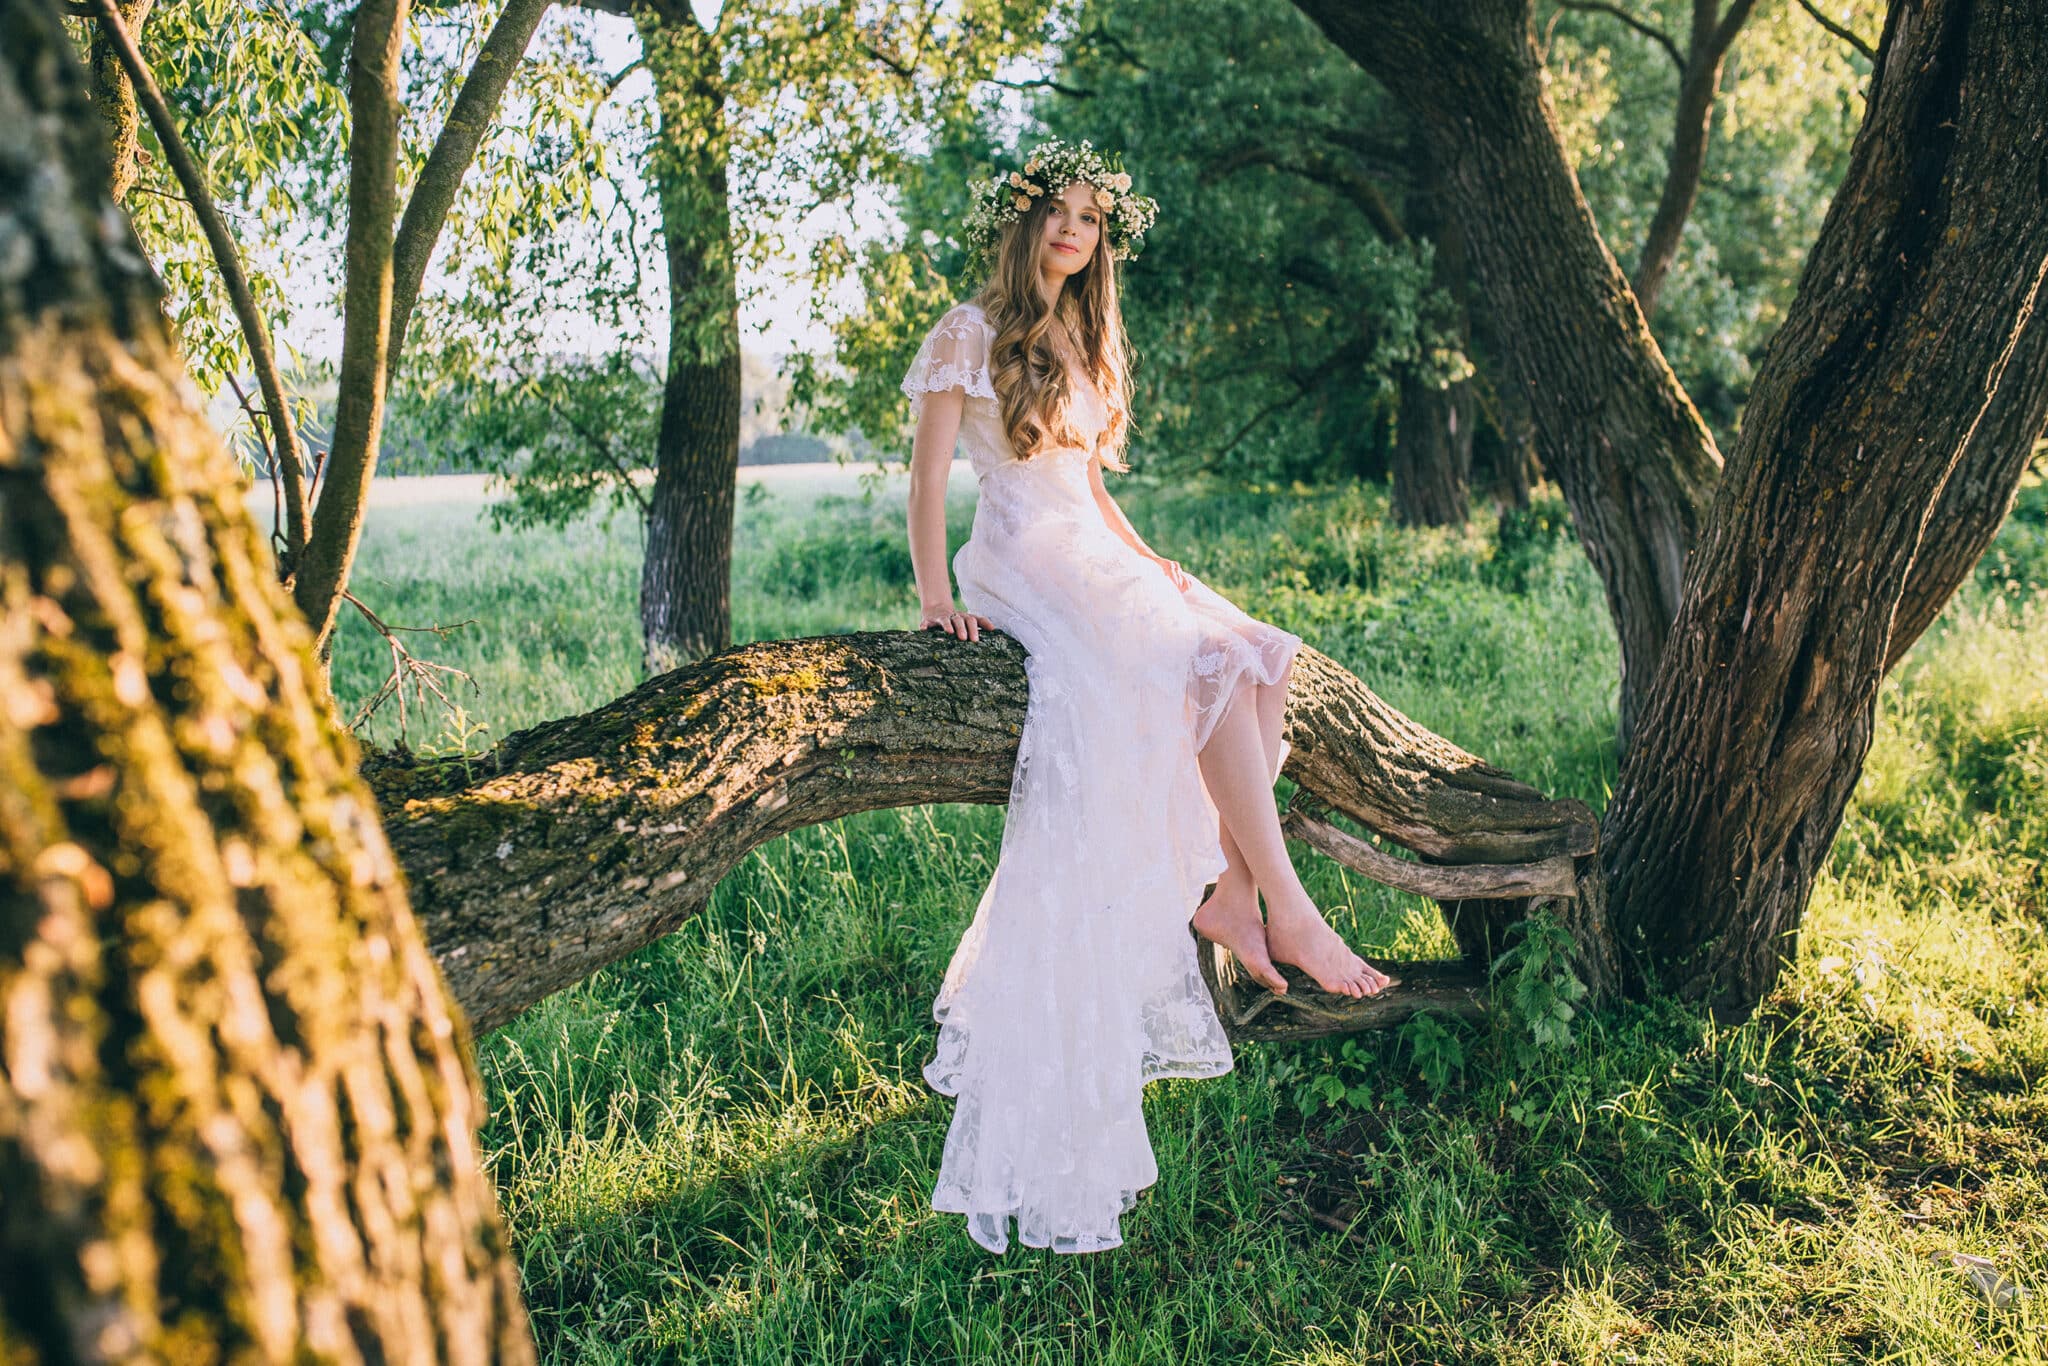 Young girl in a white dress in the meadow. Woman in a beautiful long dress posing in the garden. Stunning bride in a wedding dress